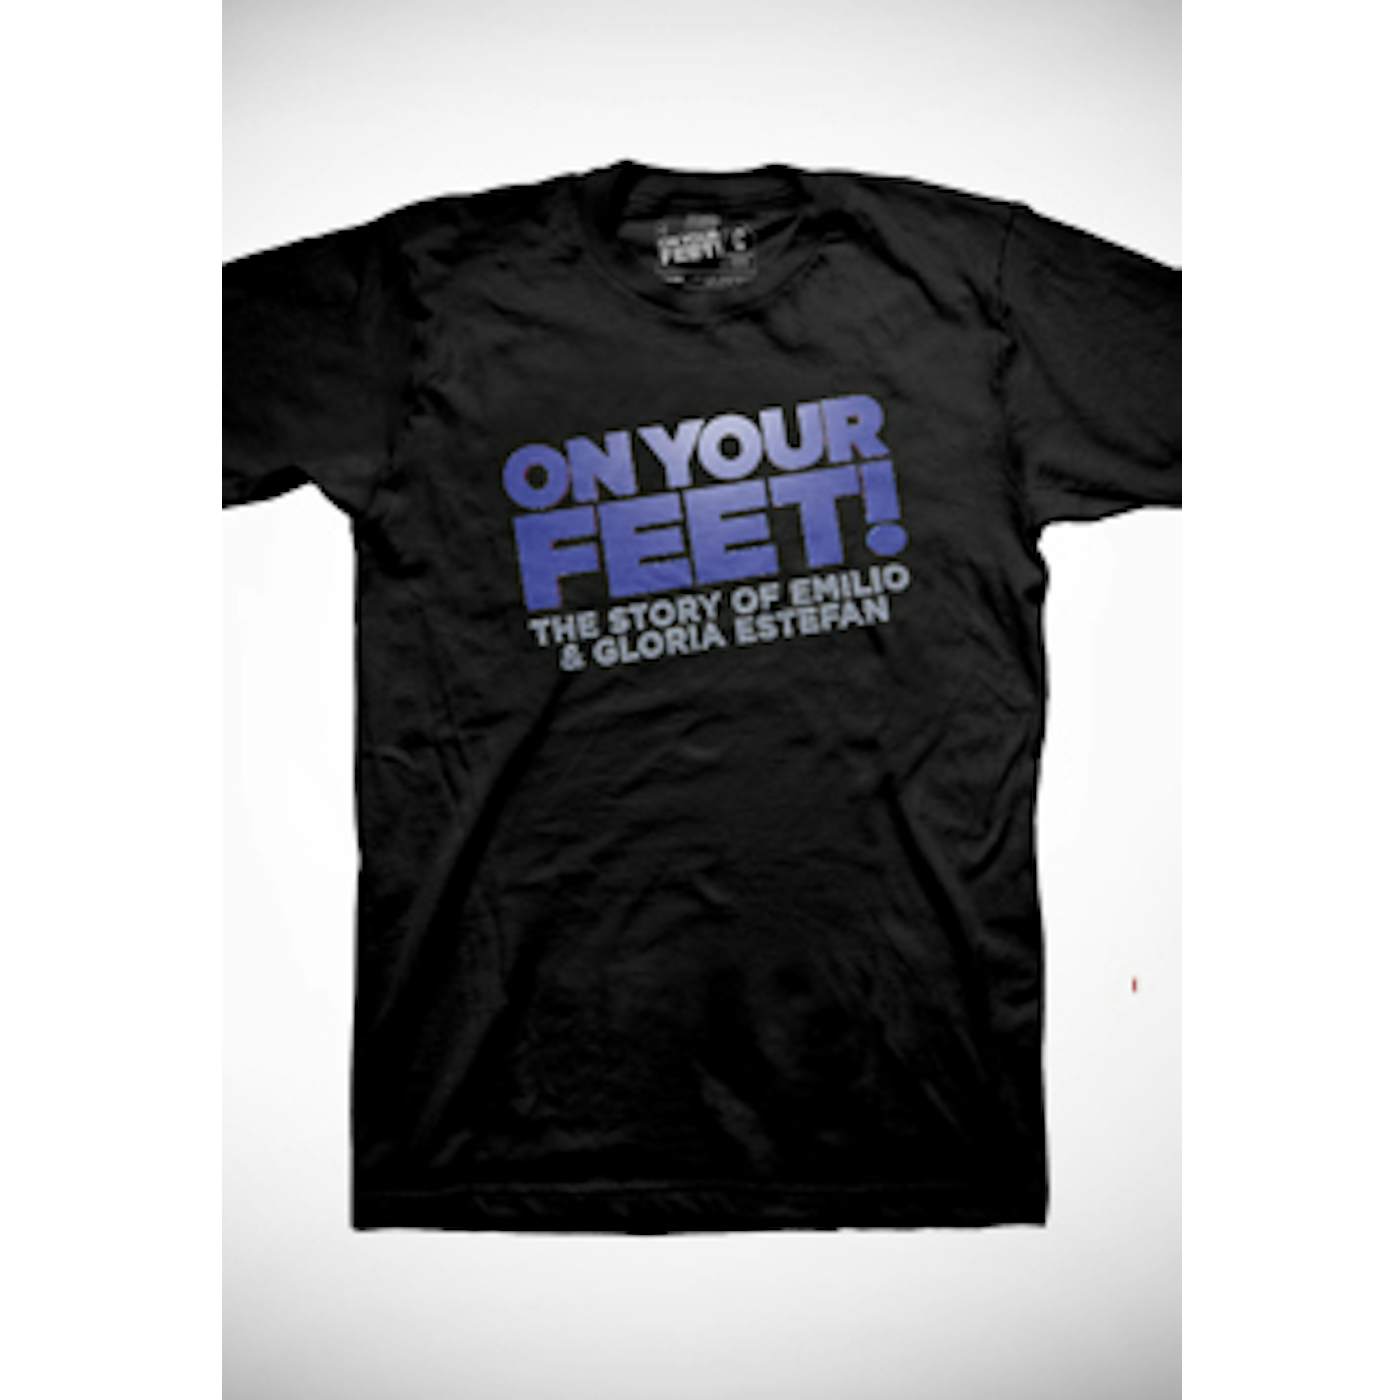 ON YOUR FEET: THE STORY OF EMILIO & GLORIA On Your Feet Blue Logo On Black T-Shirt